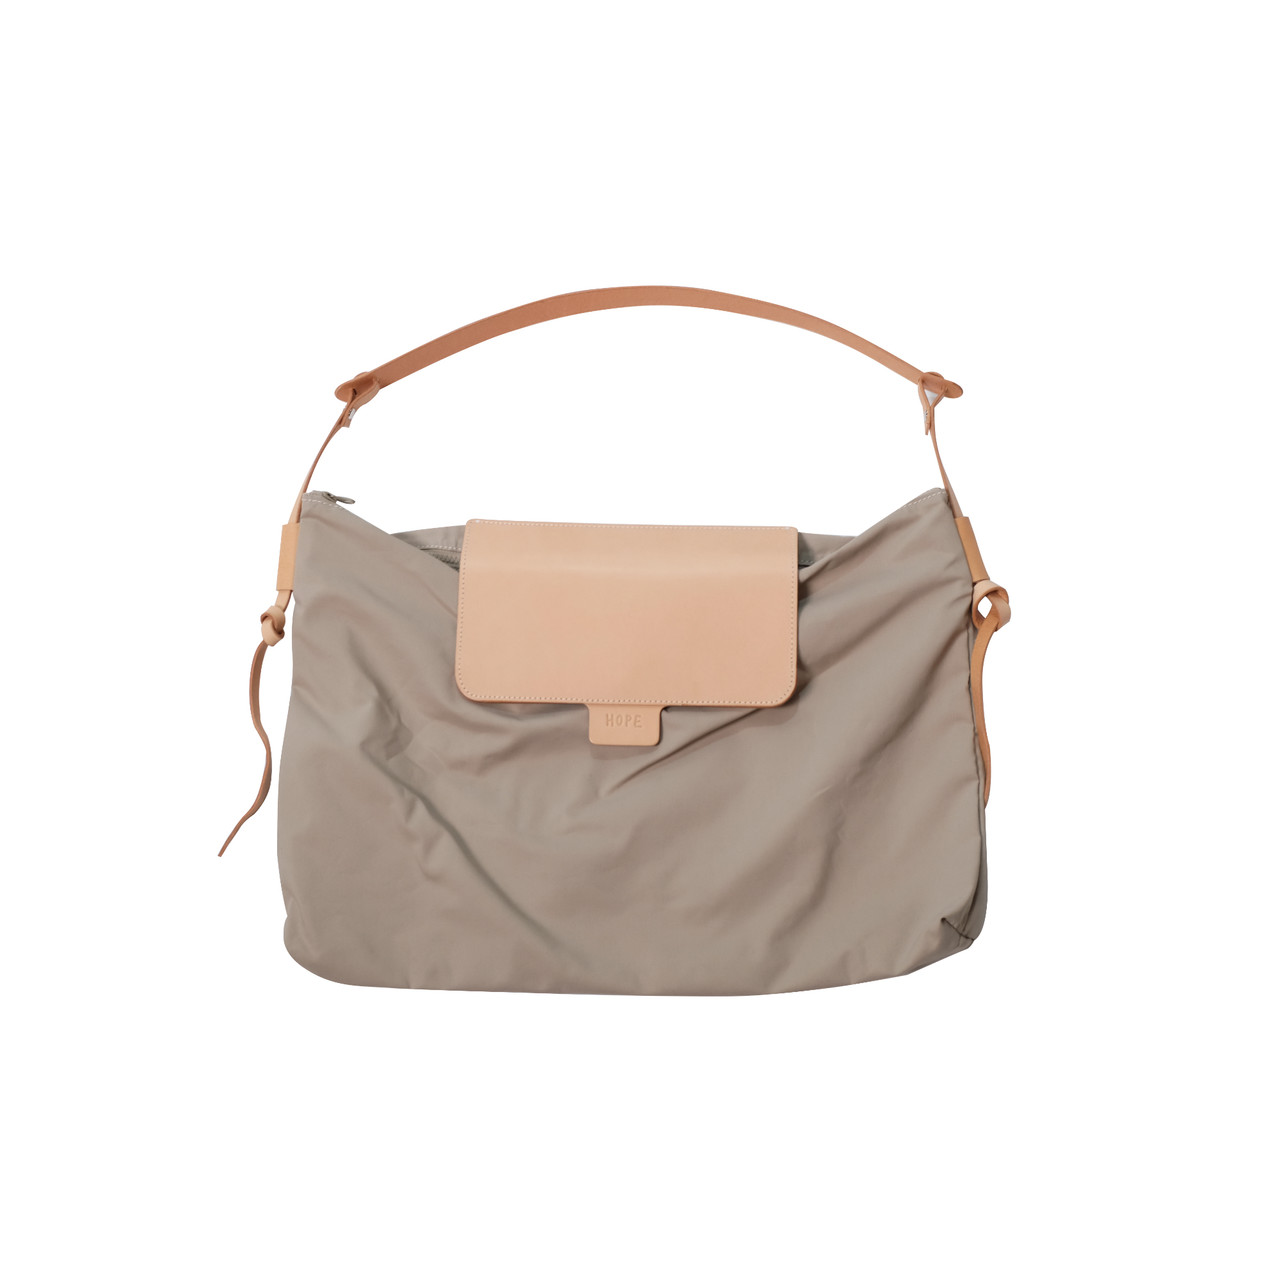 Essential product#1_"working bag(Beige)"